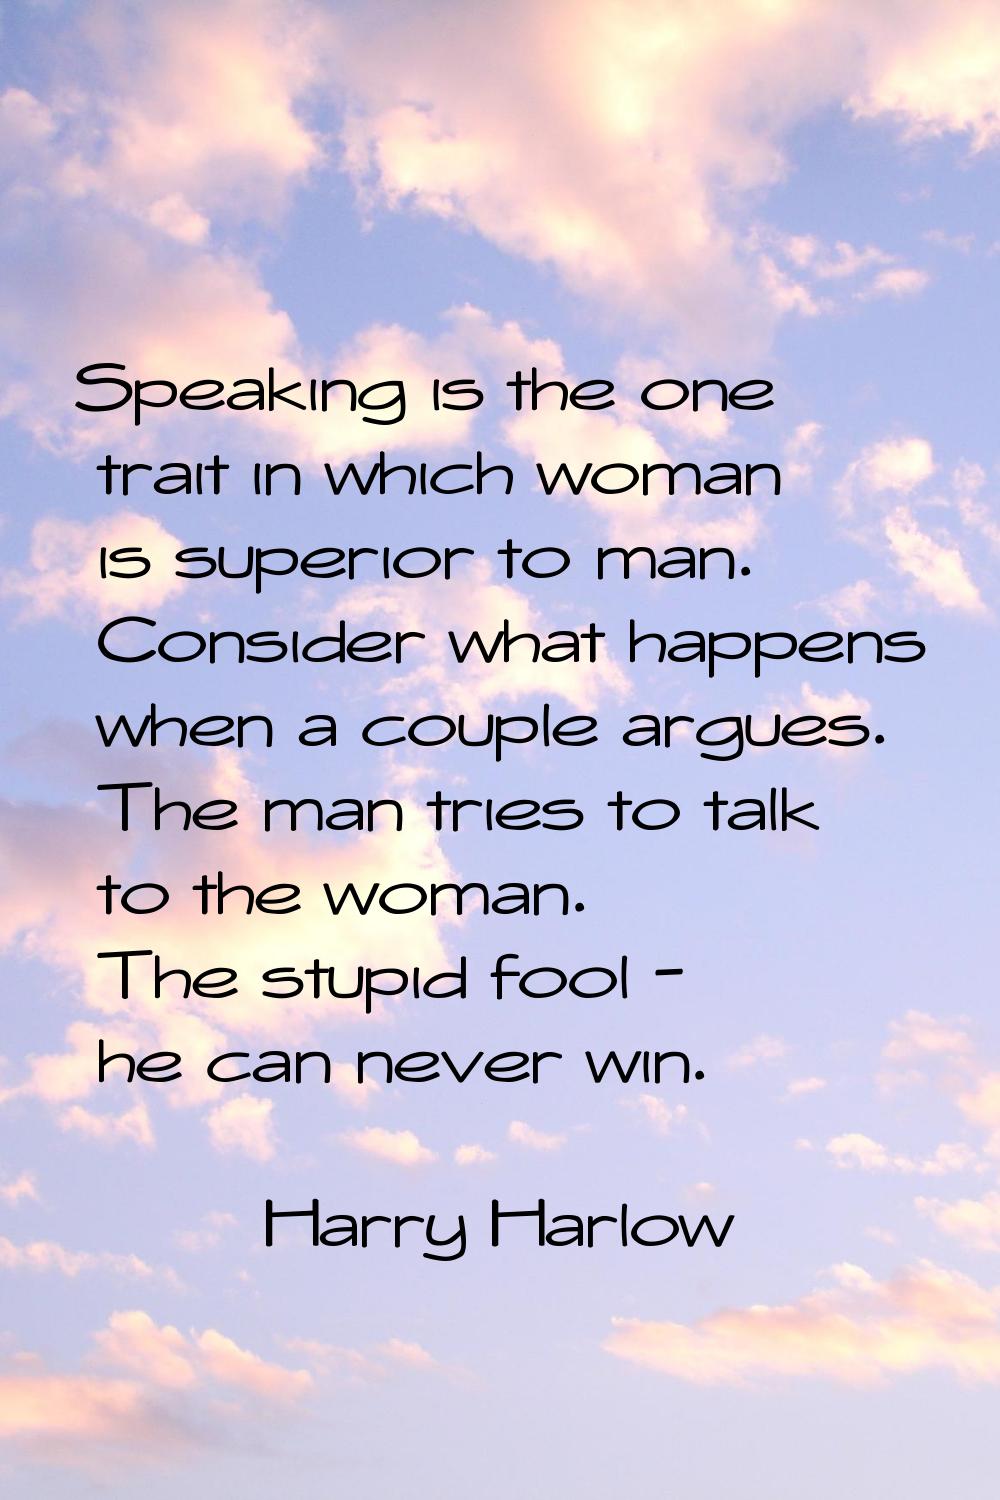 Speaking is the one trait in which woman is superior to man. Consider what happens when a couple ar